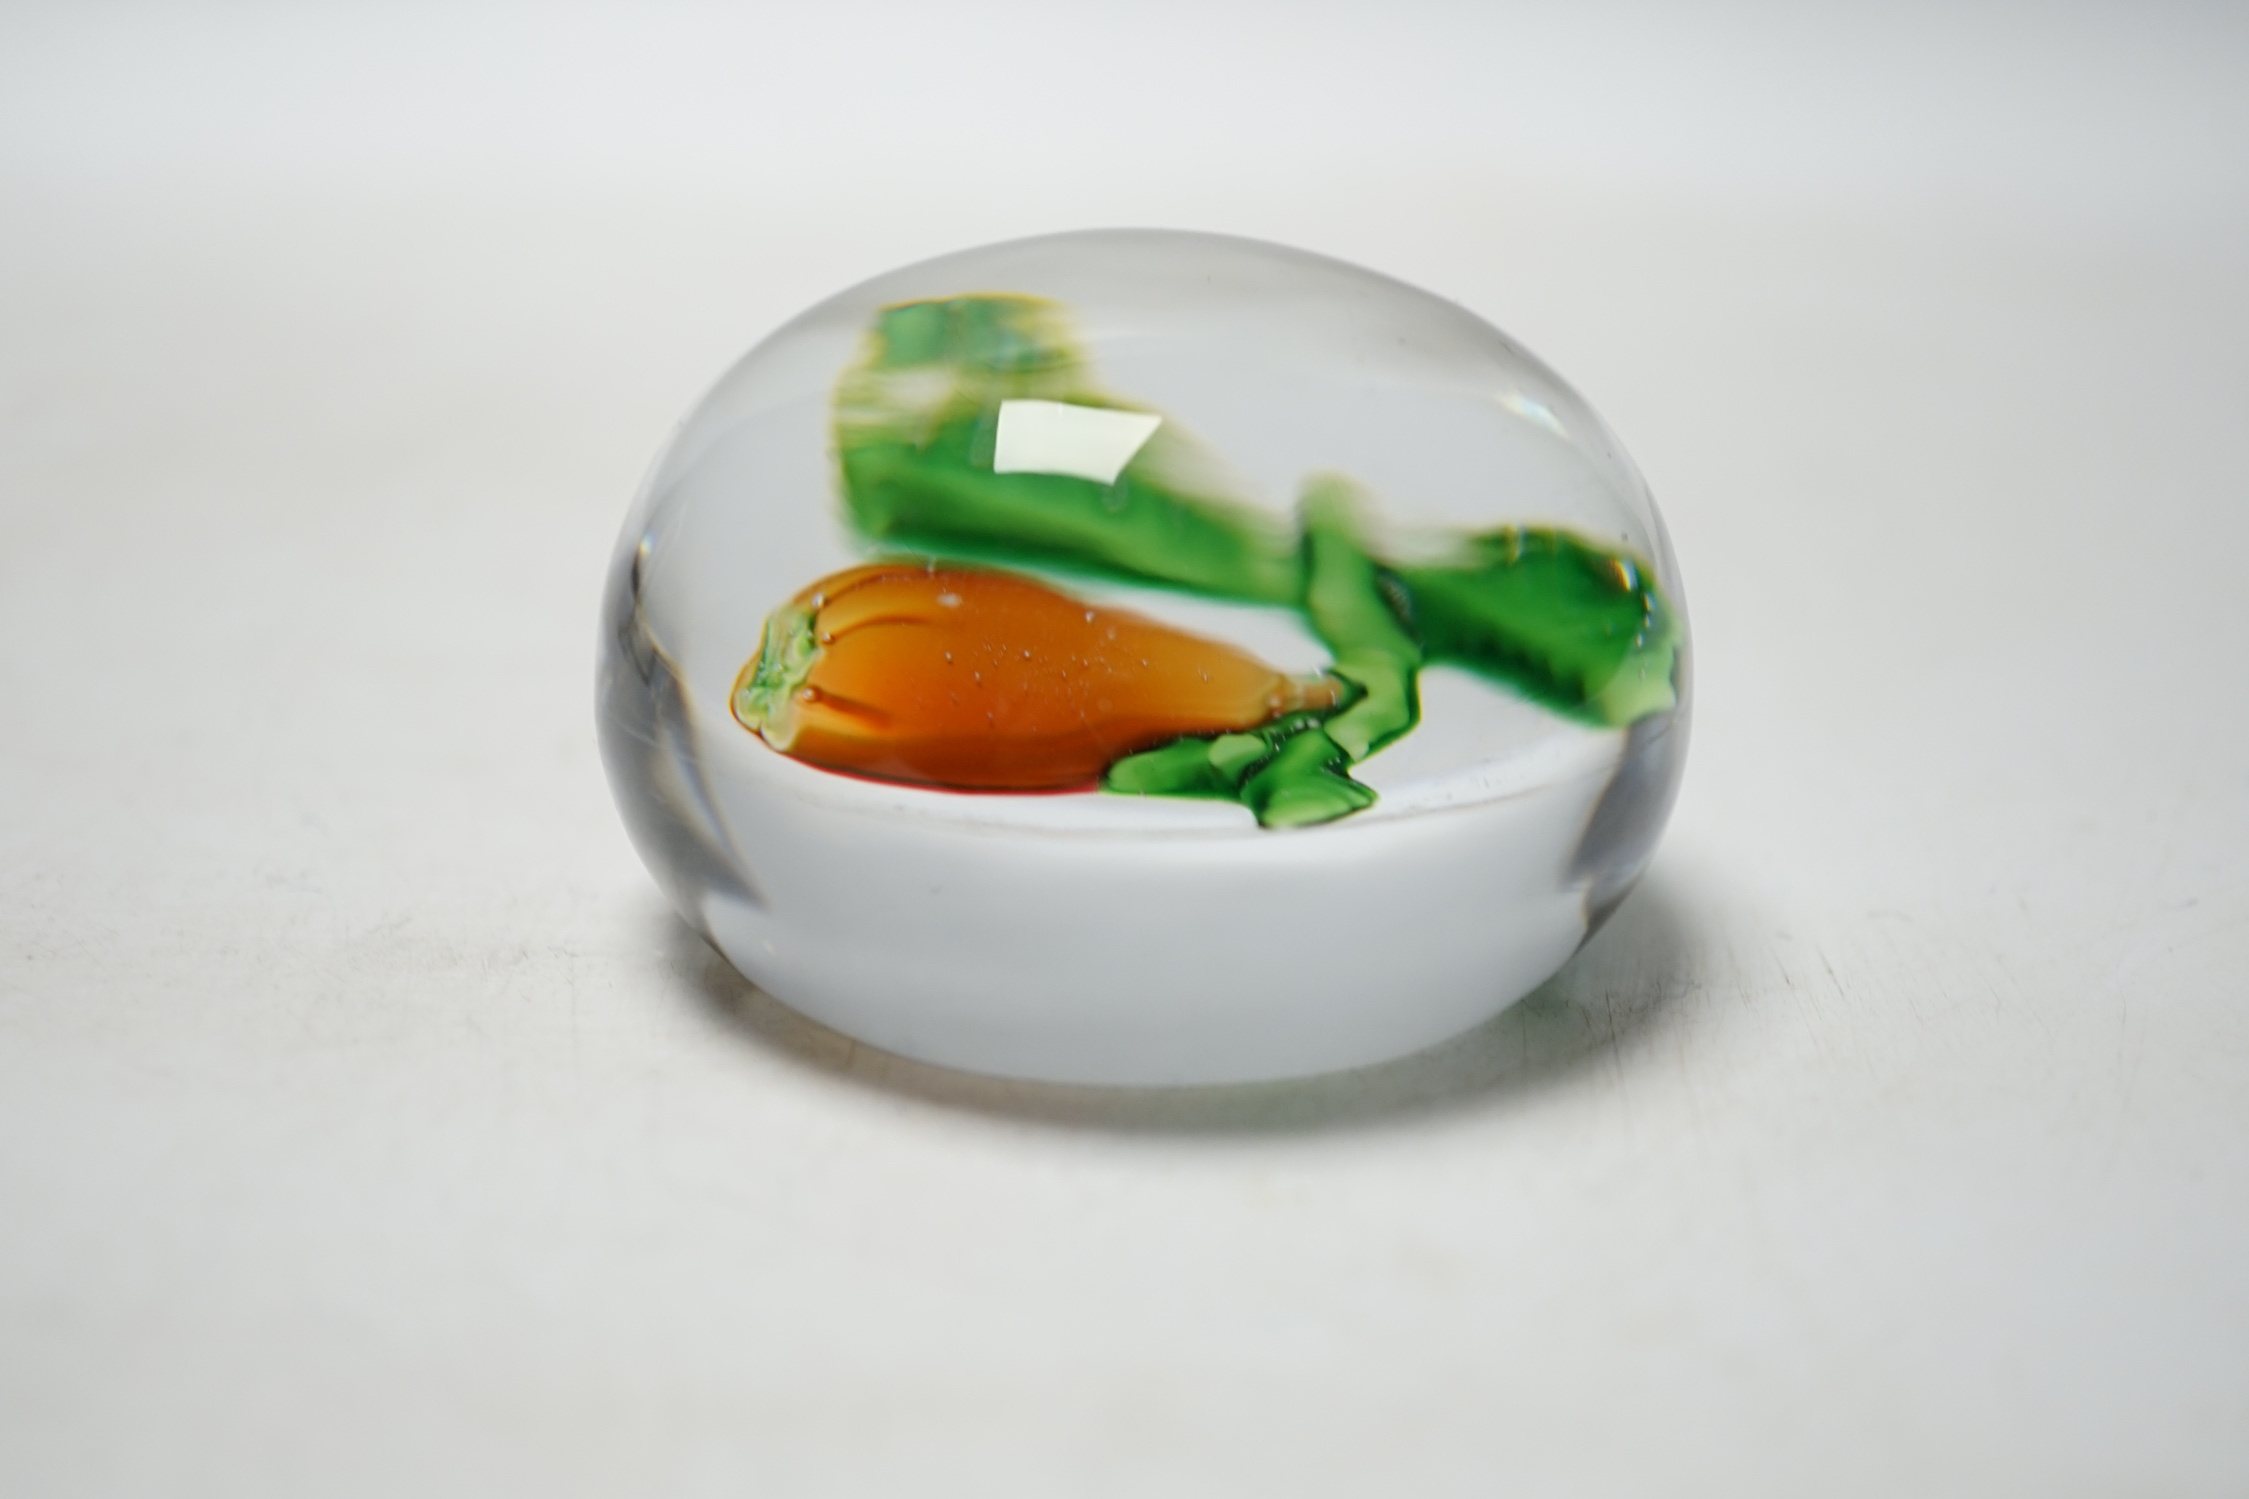 A rare Pantin glass lampwork pear paperweight, mid 19th century, 6.5cm in diameter